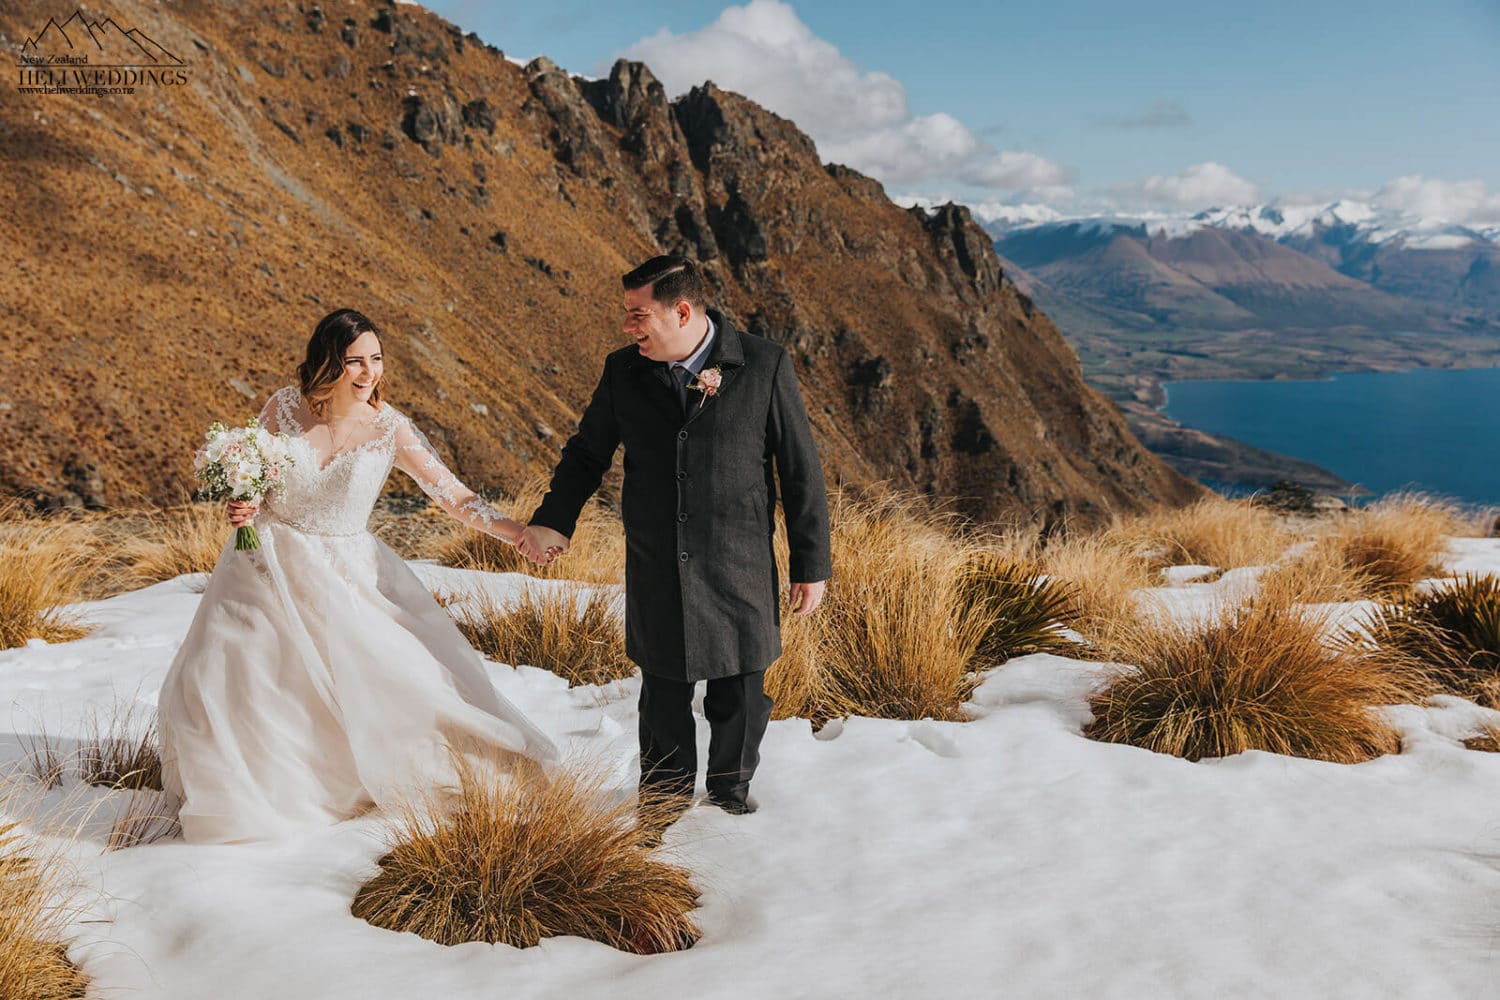 Wedding couple walking in snow on The Ledge, Queenstown heli wedding package